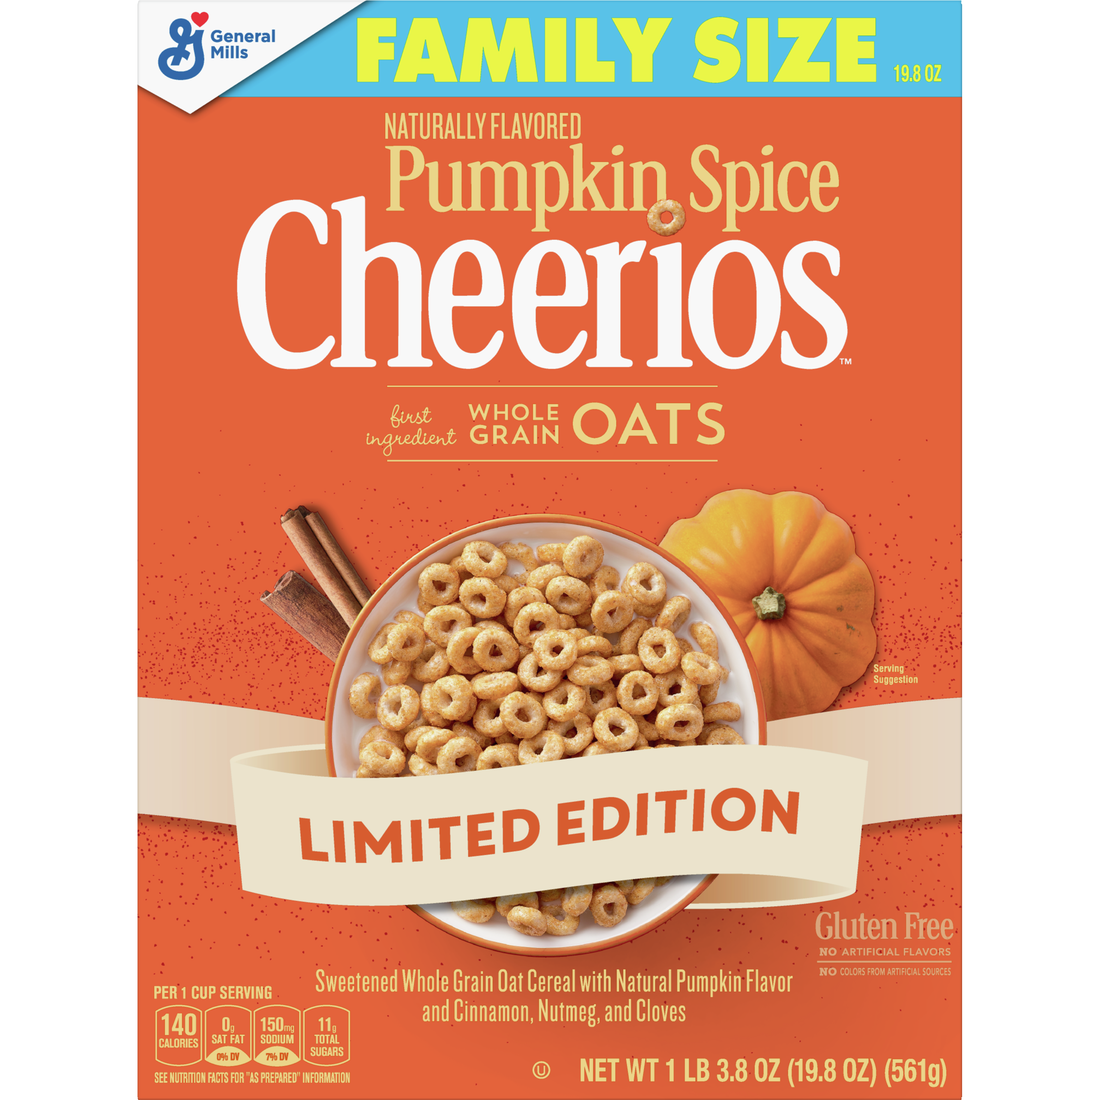 General Mills, Breakfast Cereal, Pumpkin Spice Cheerios, Gluten Free, Family Size, 19.8oz Box - image 5 of 11